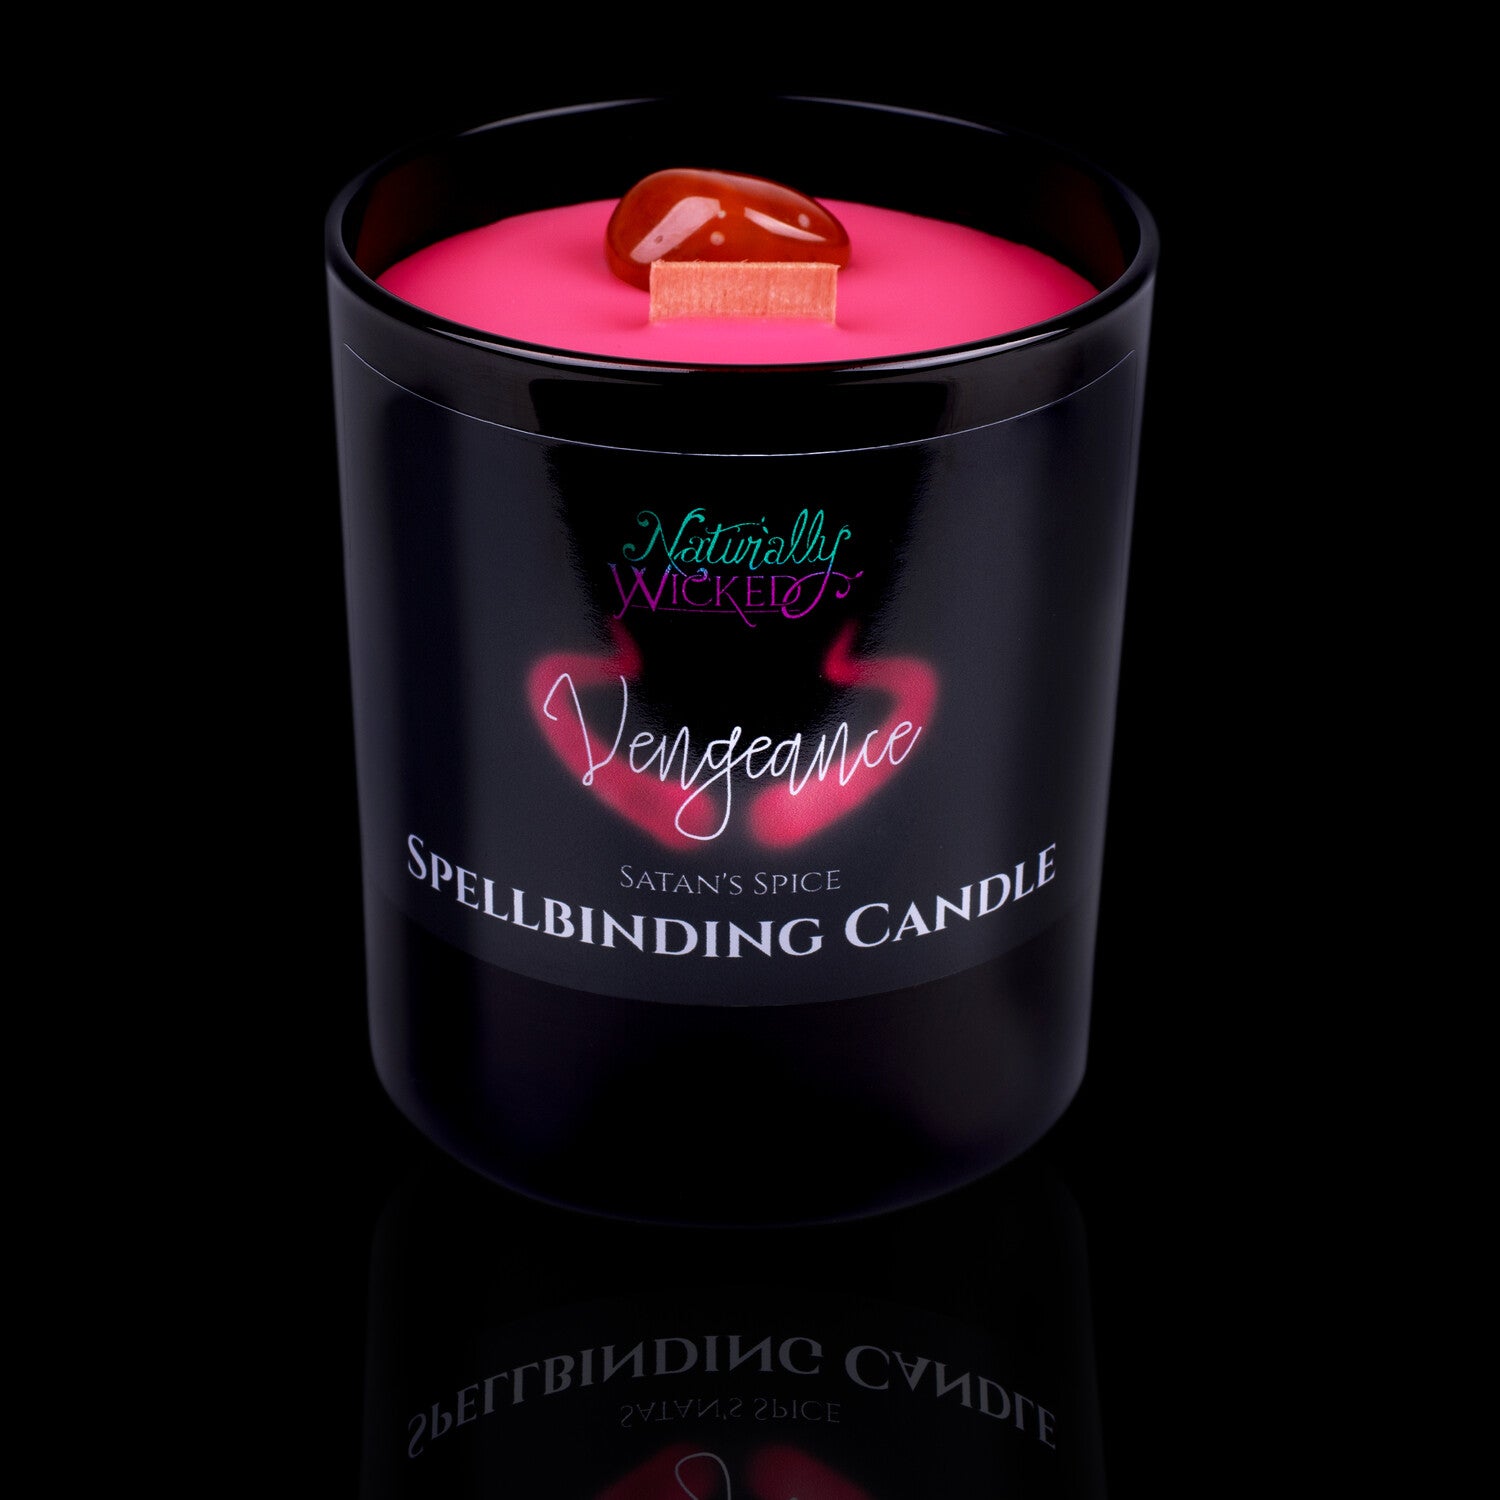 A Gift From Satan. Naturally Wicked Spellbinding Vengeance Crystal Candle Entombed In Rich Red Plant-Based Wax With Crackling Wood Wick & Carnelian Crystal